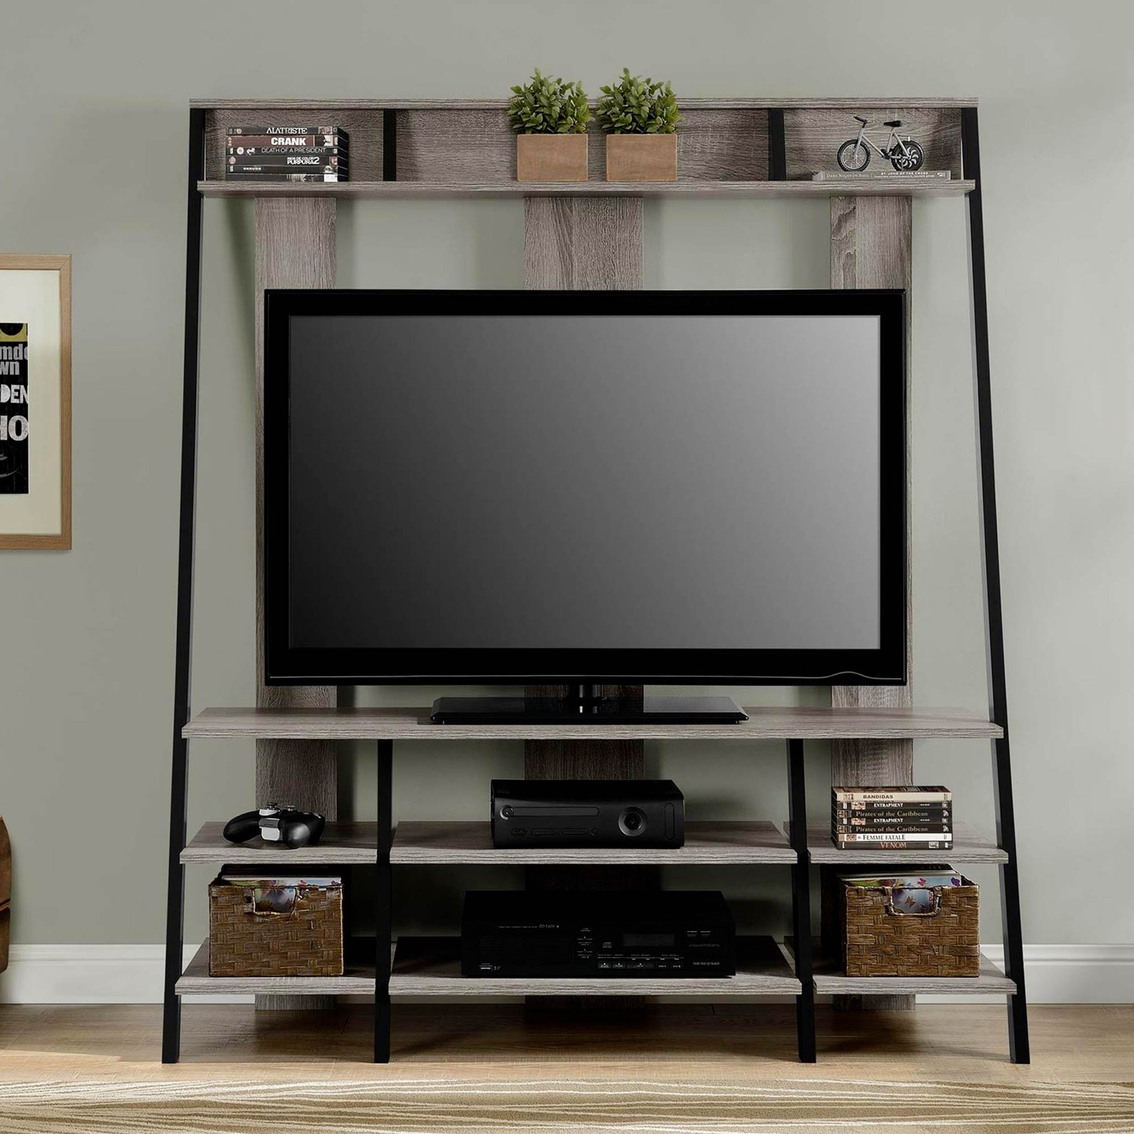 Altra Dunnington Ladder Style Home Entertainment Center - Image 3 of 4